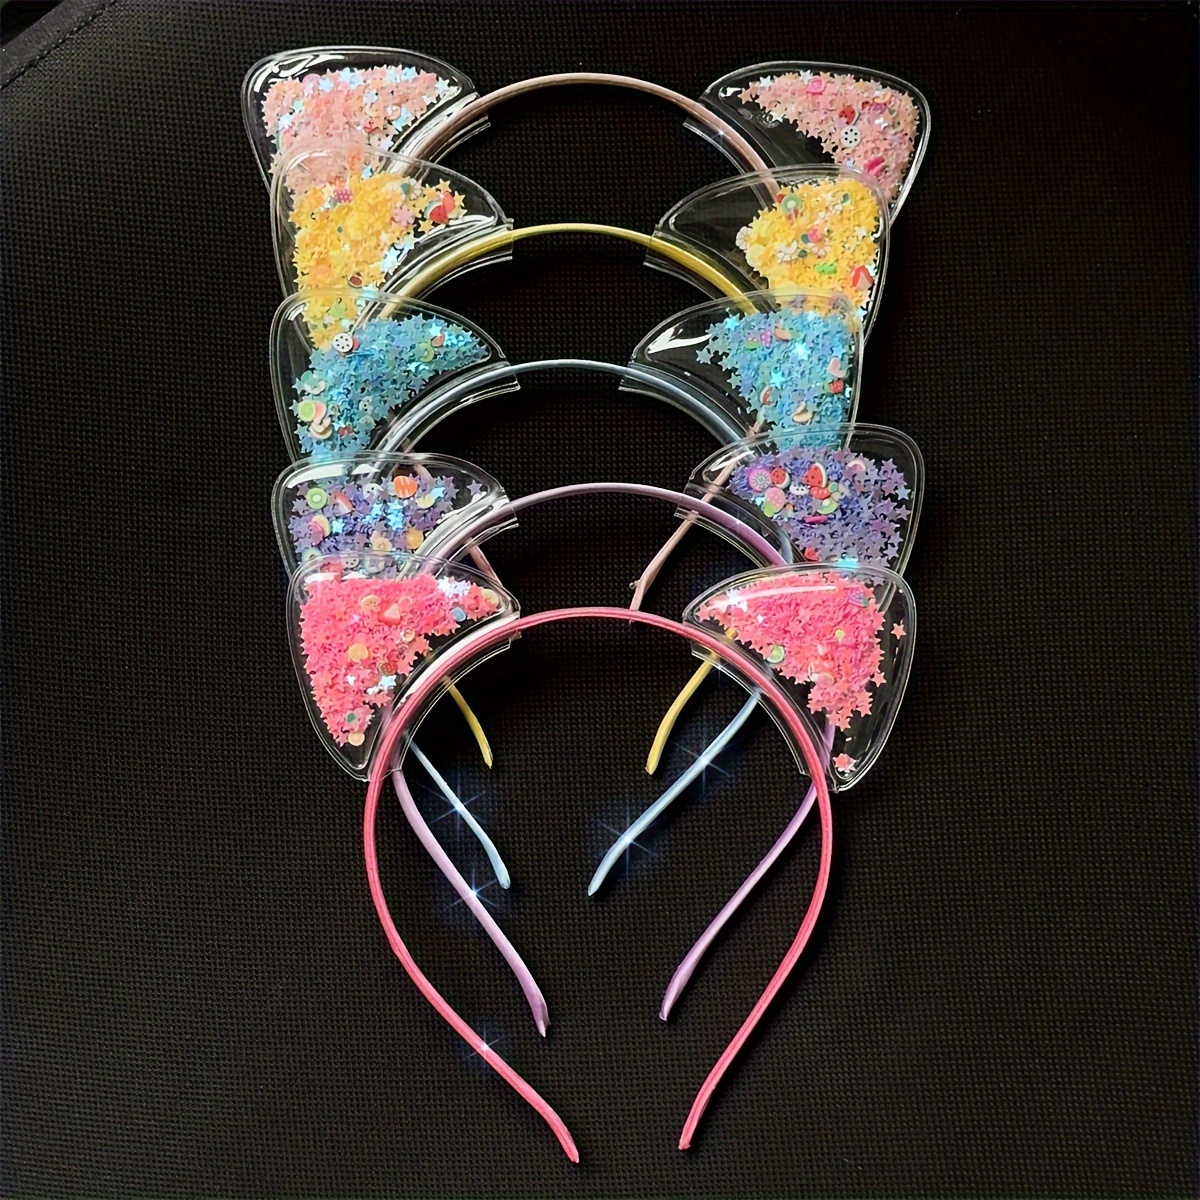 

festive" 5-piece Cute & Colorful Quicksand Cat Ear Headbands Set For Women And Girls - Perfect For Parties, Cosplay & Photo Props